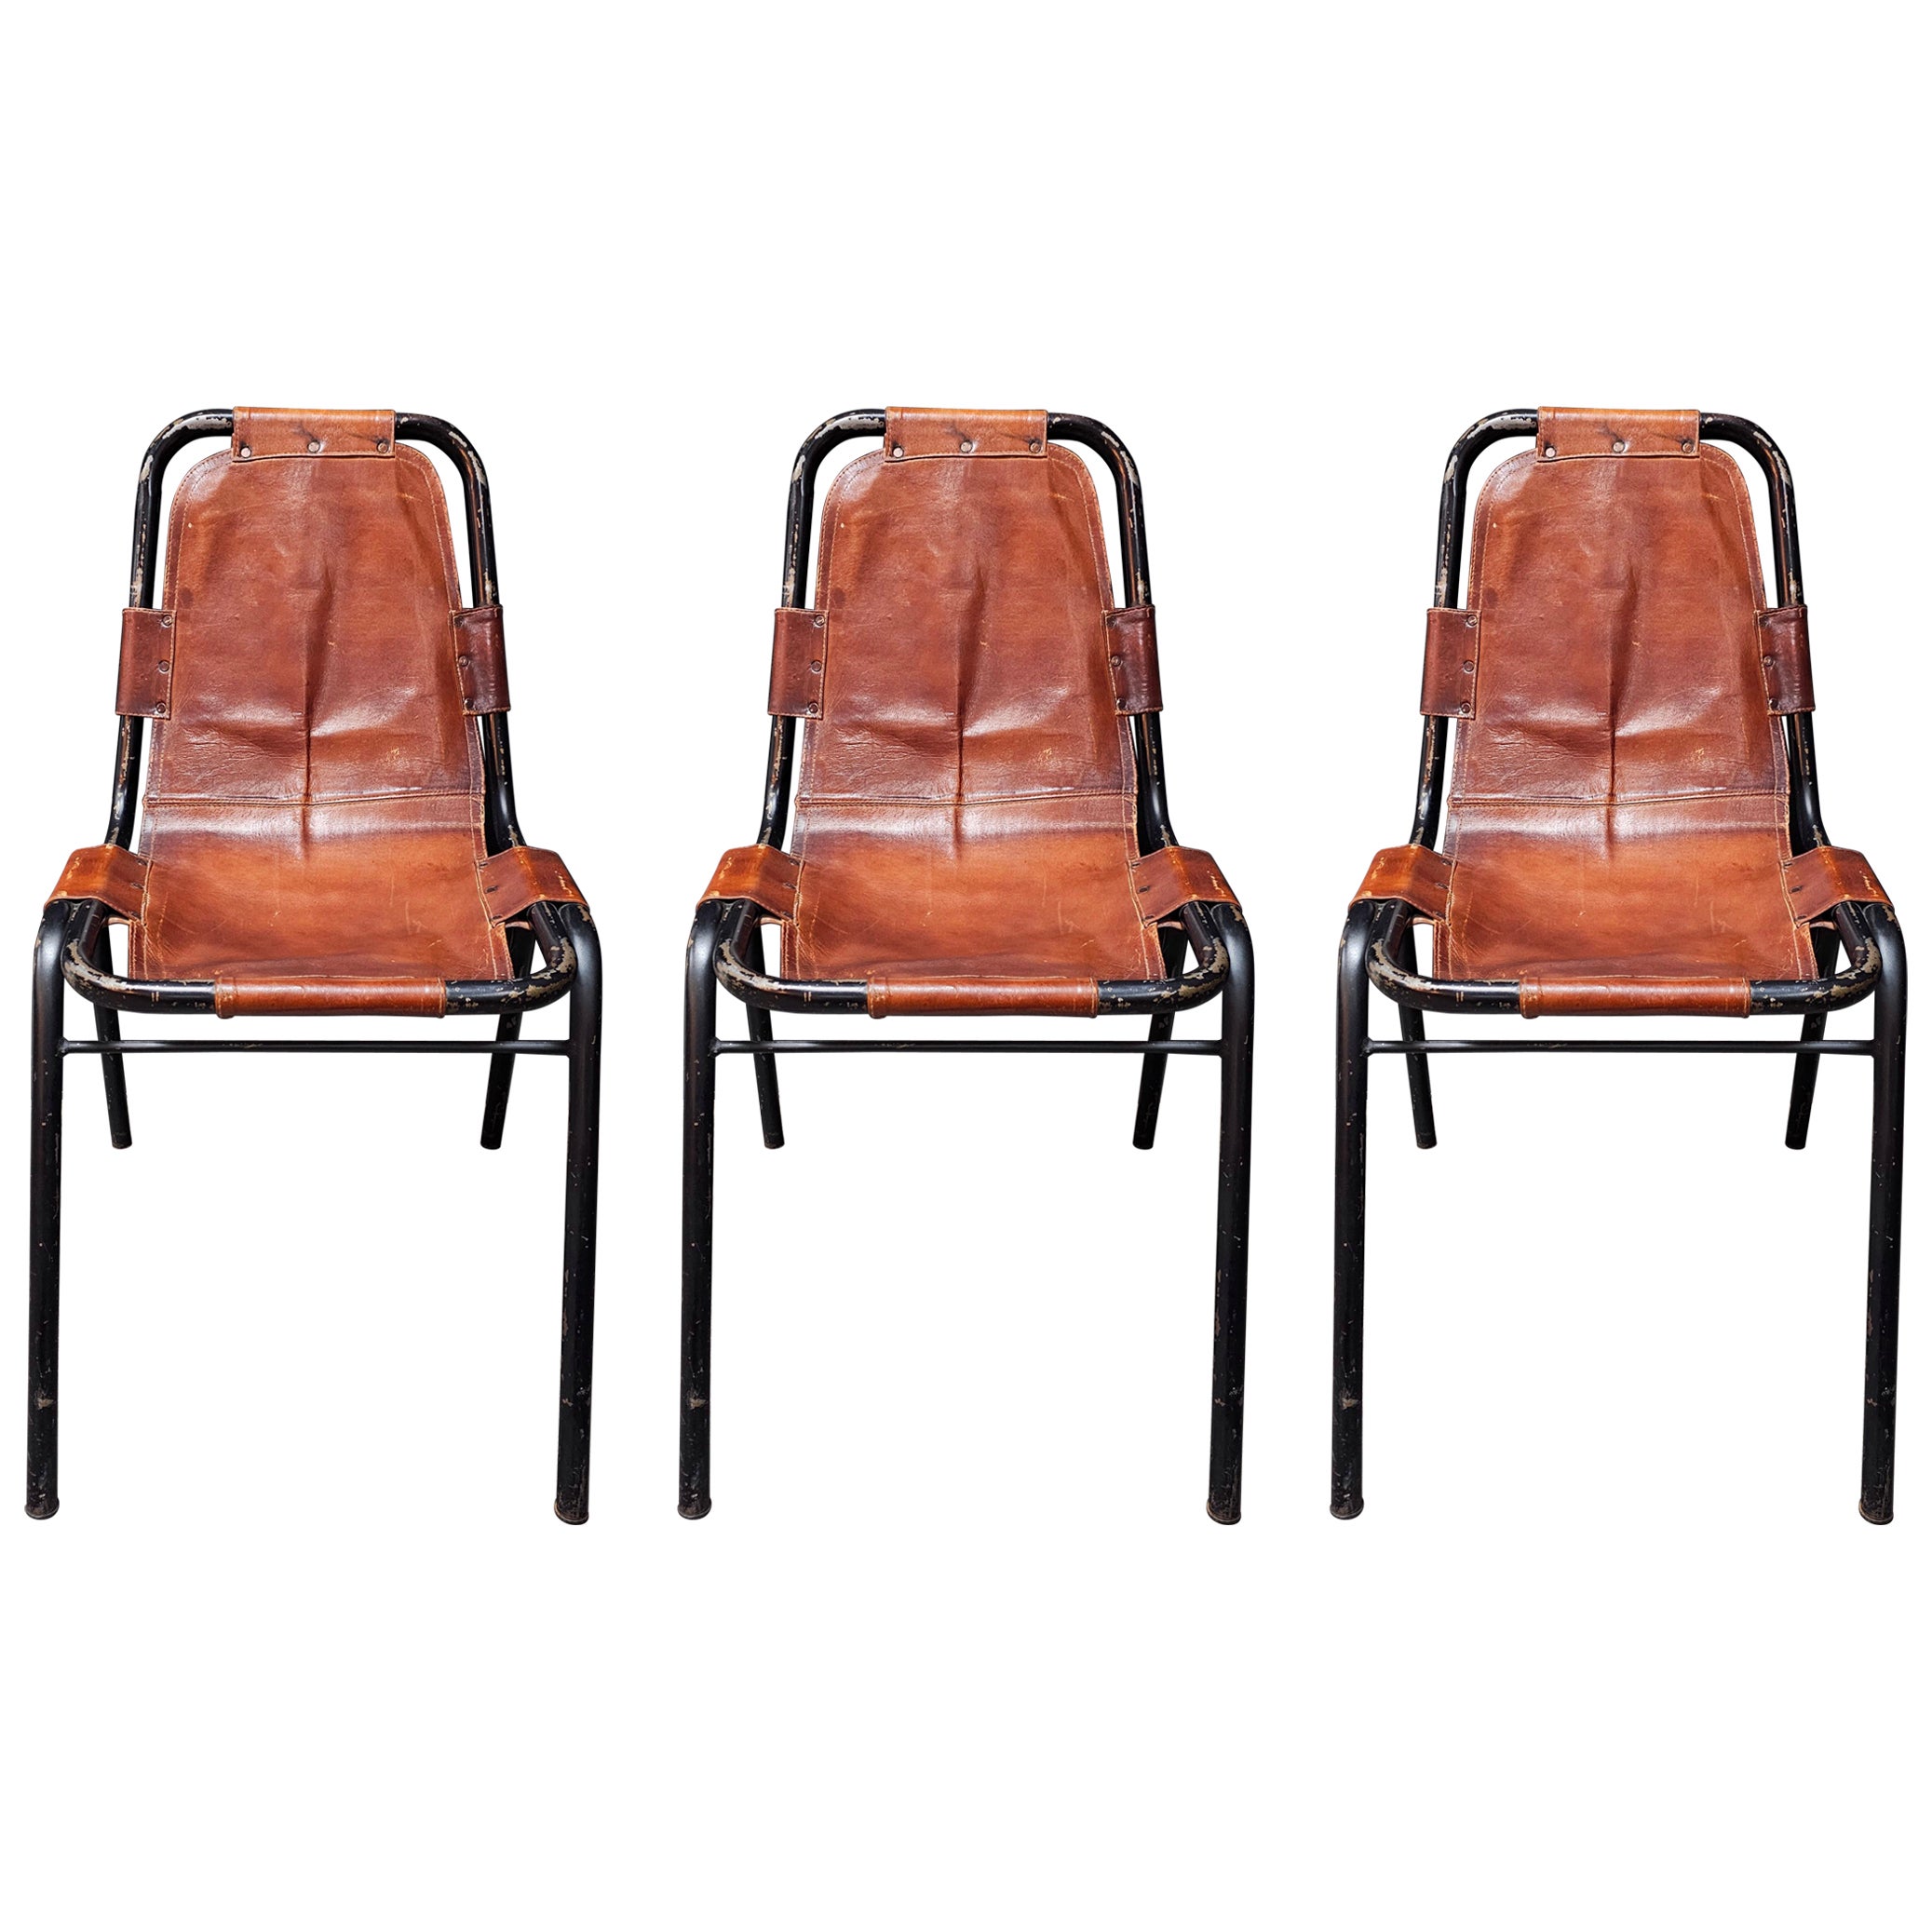 Set of 3 Leather Chairs by DalVera in style of Charlotte Perriand, France, 1950s